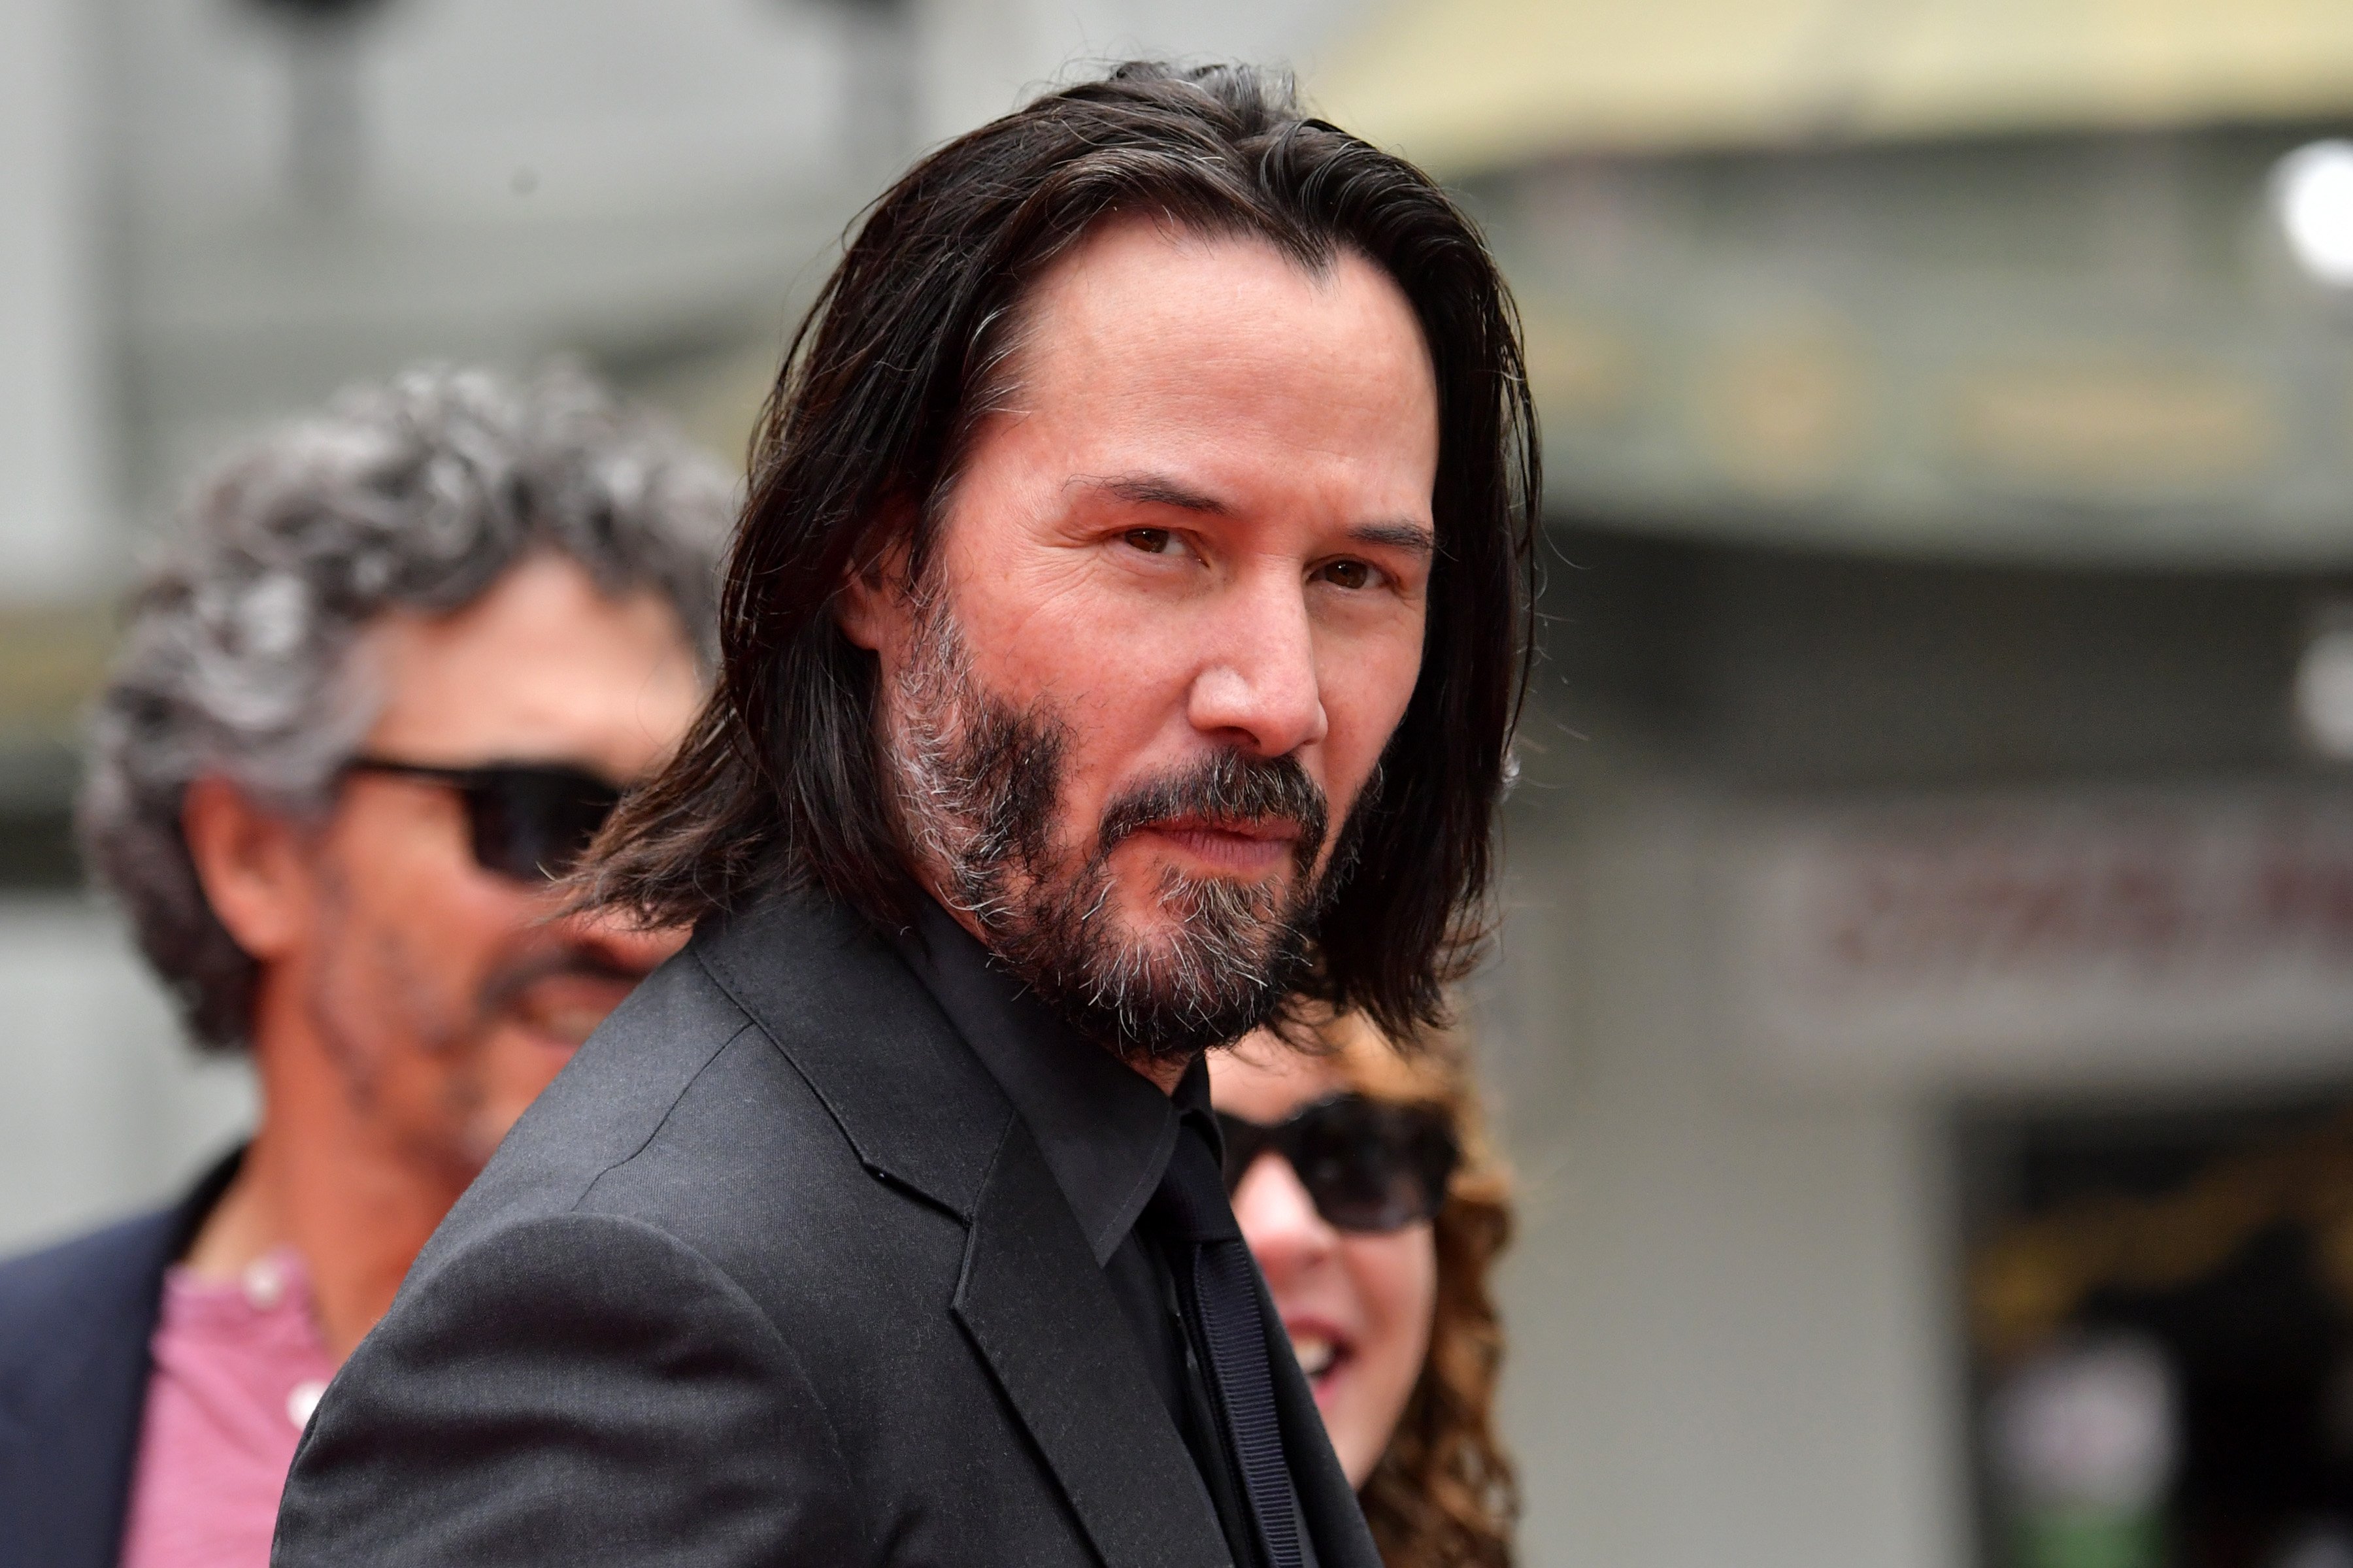 Keanu Reeves arrives for his handprint ceremony on May 14, 2019. | Photo: Getty Images